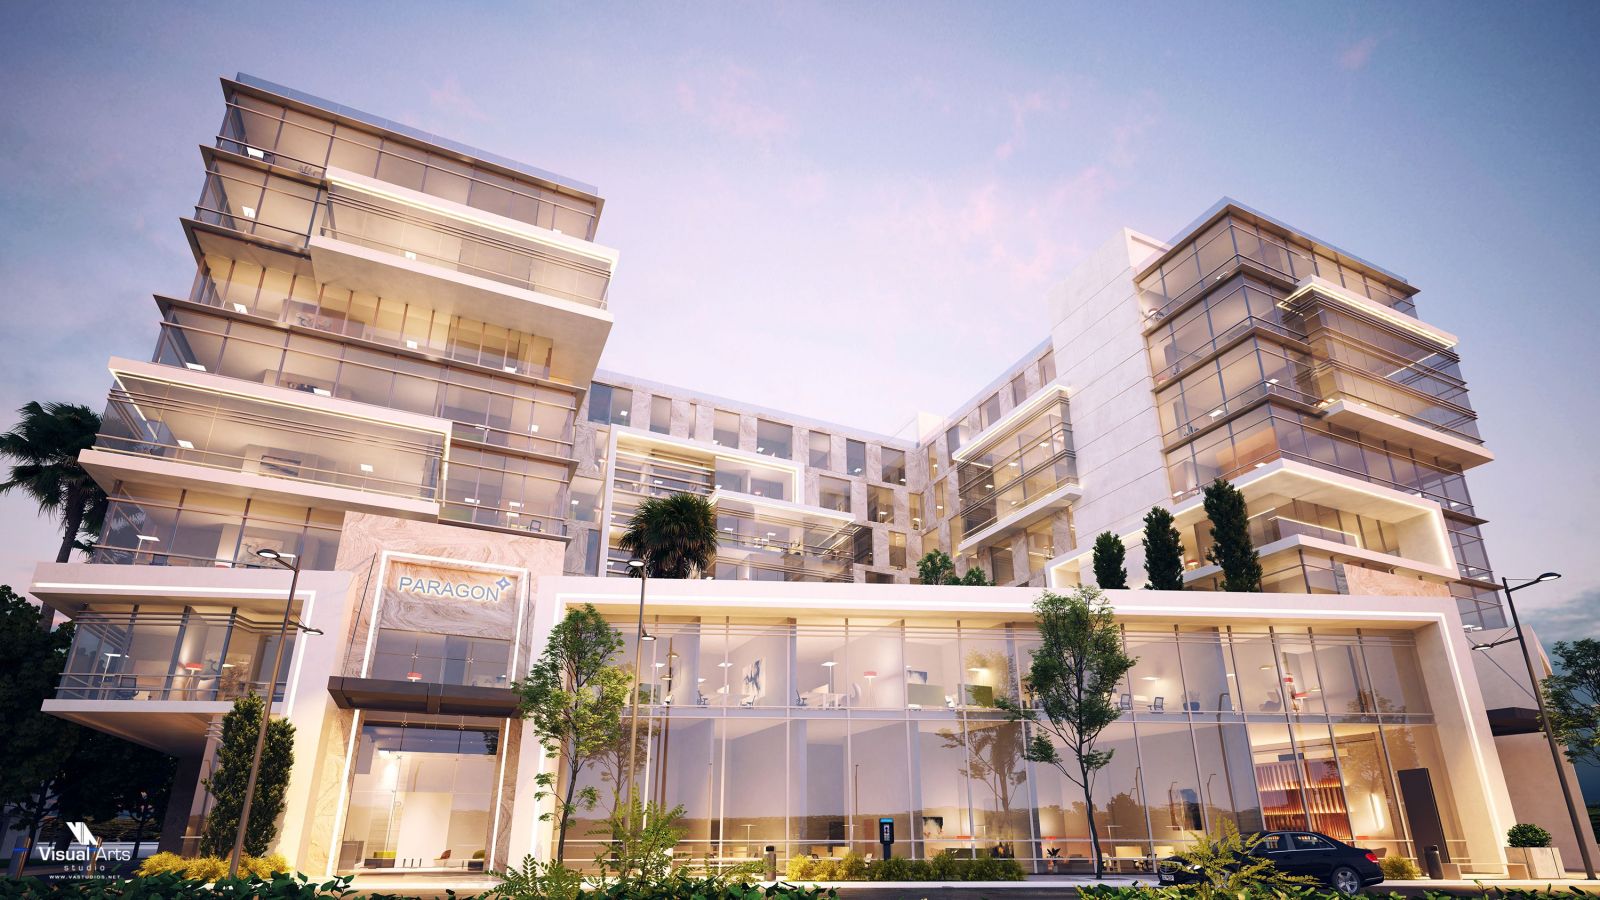 Administrative units with an area of 50 meters for reservation in Paragon New Capital Mall